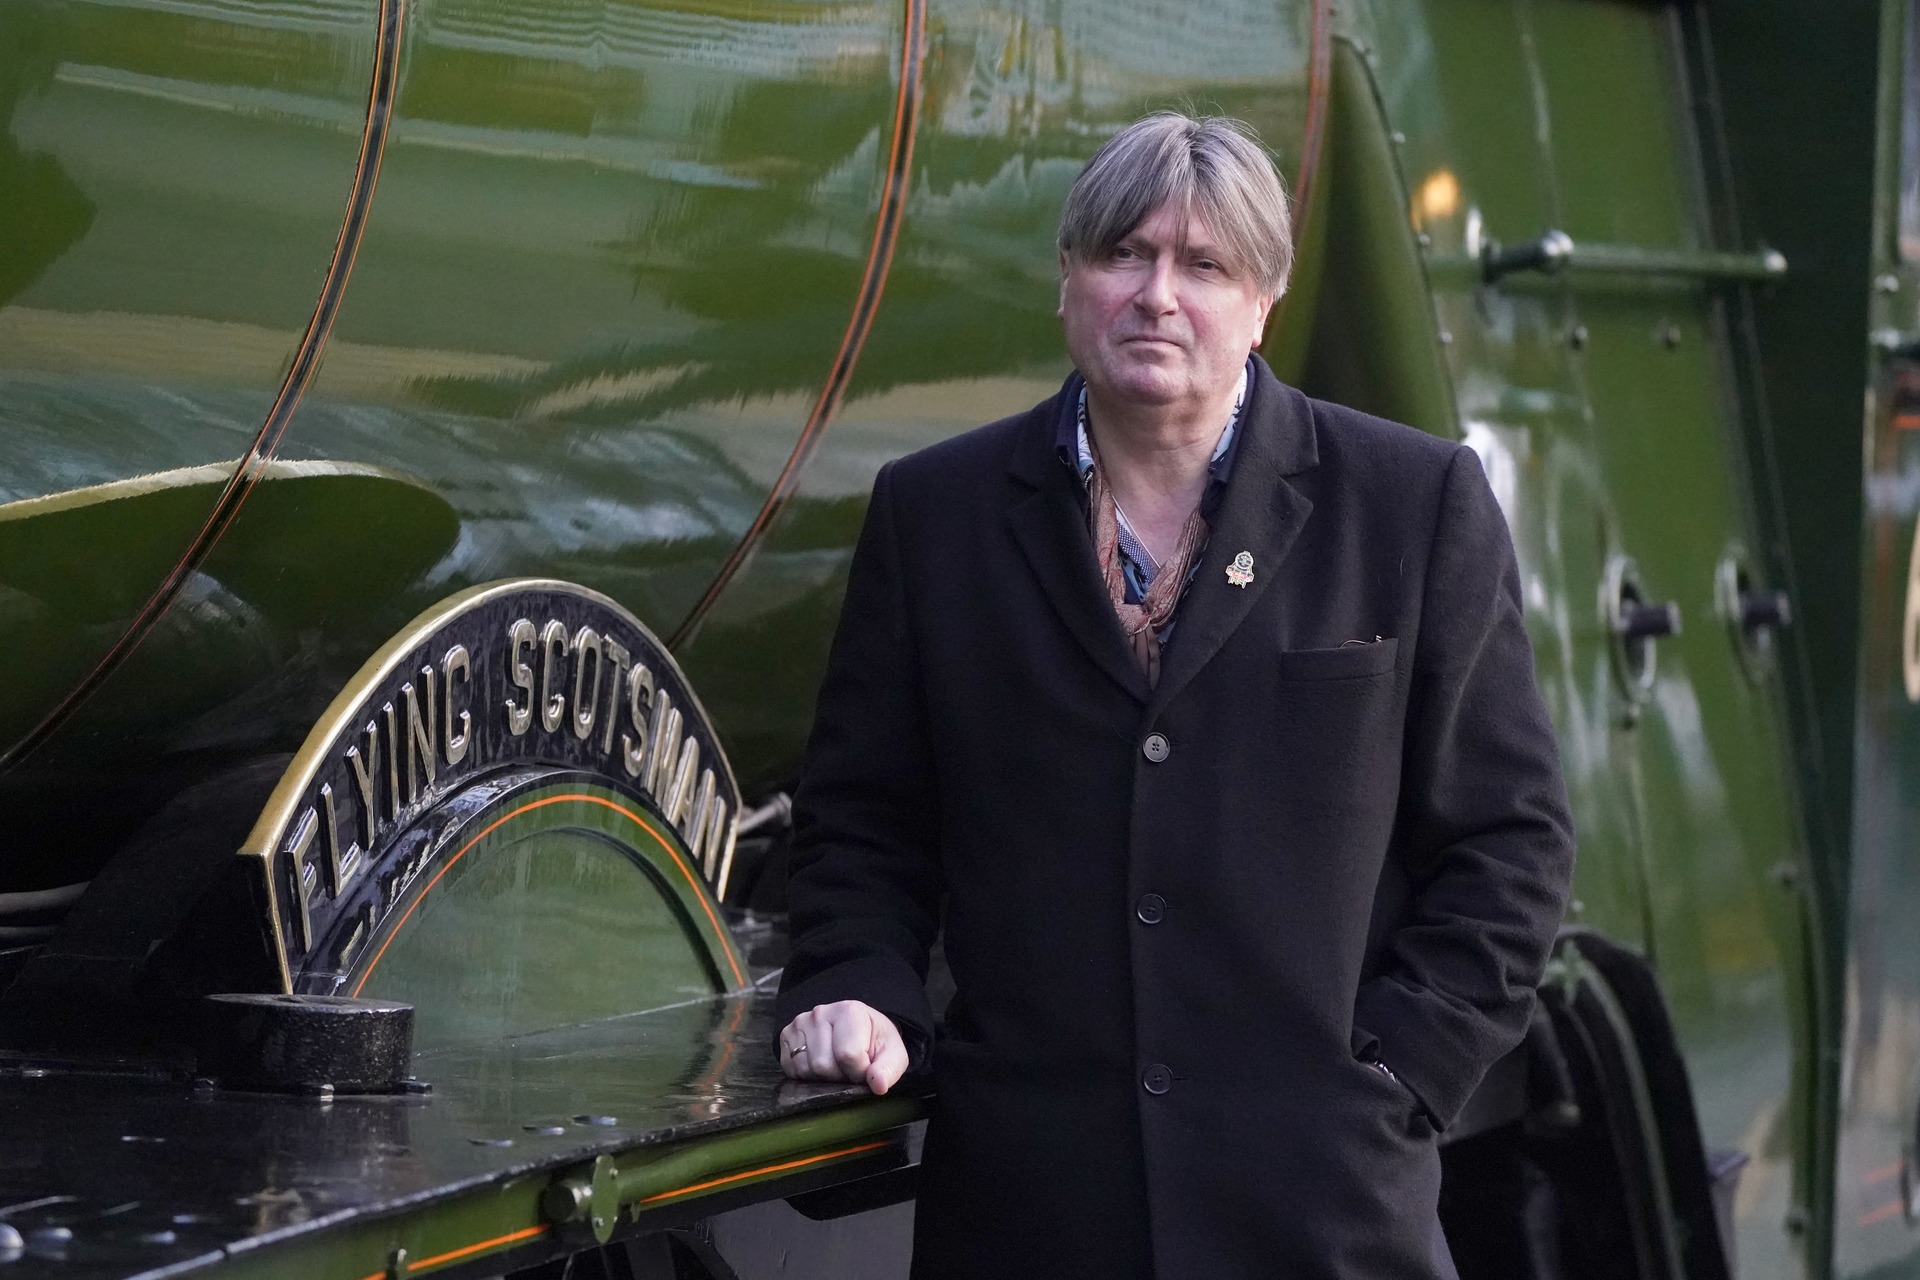 Poet Laureate Simon Armitage rode the locomotive to find inspiration for his poem (Andrew Milligan/PA)
